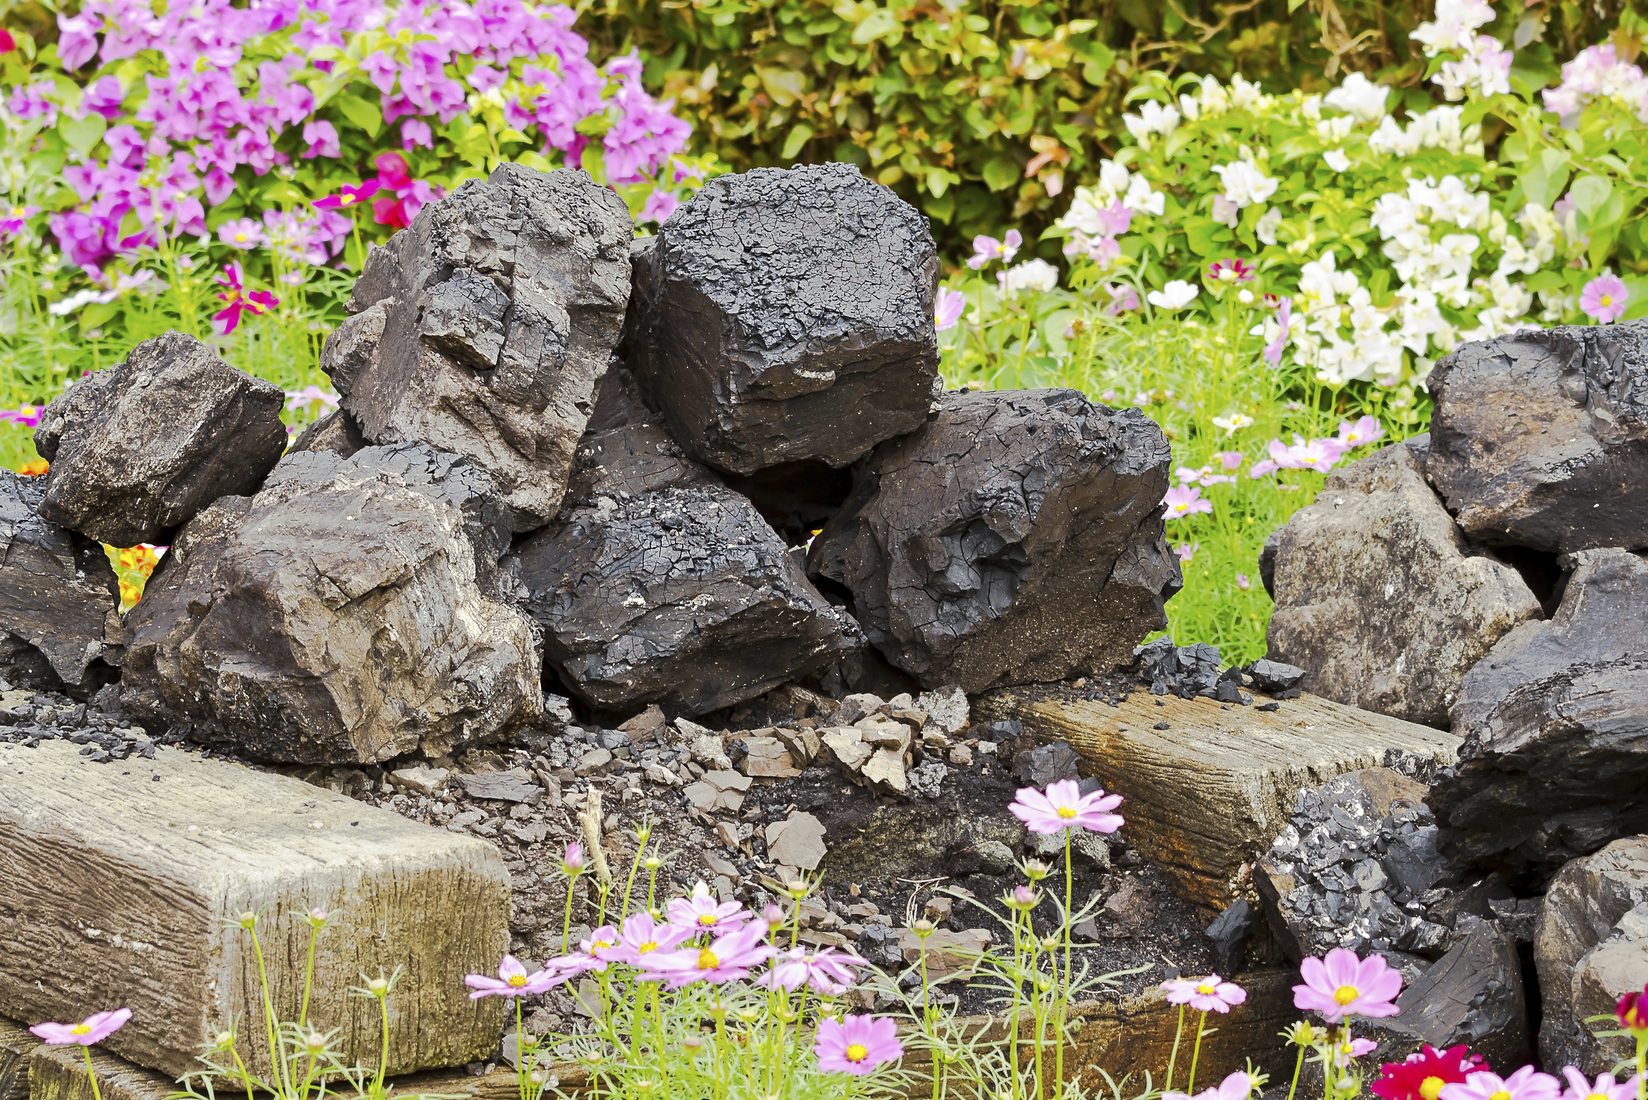 Flowers spring up around a pile of coal. (iStock Photo)